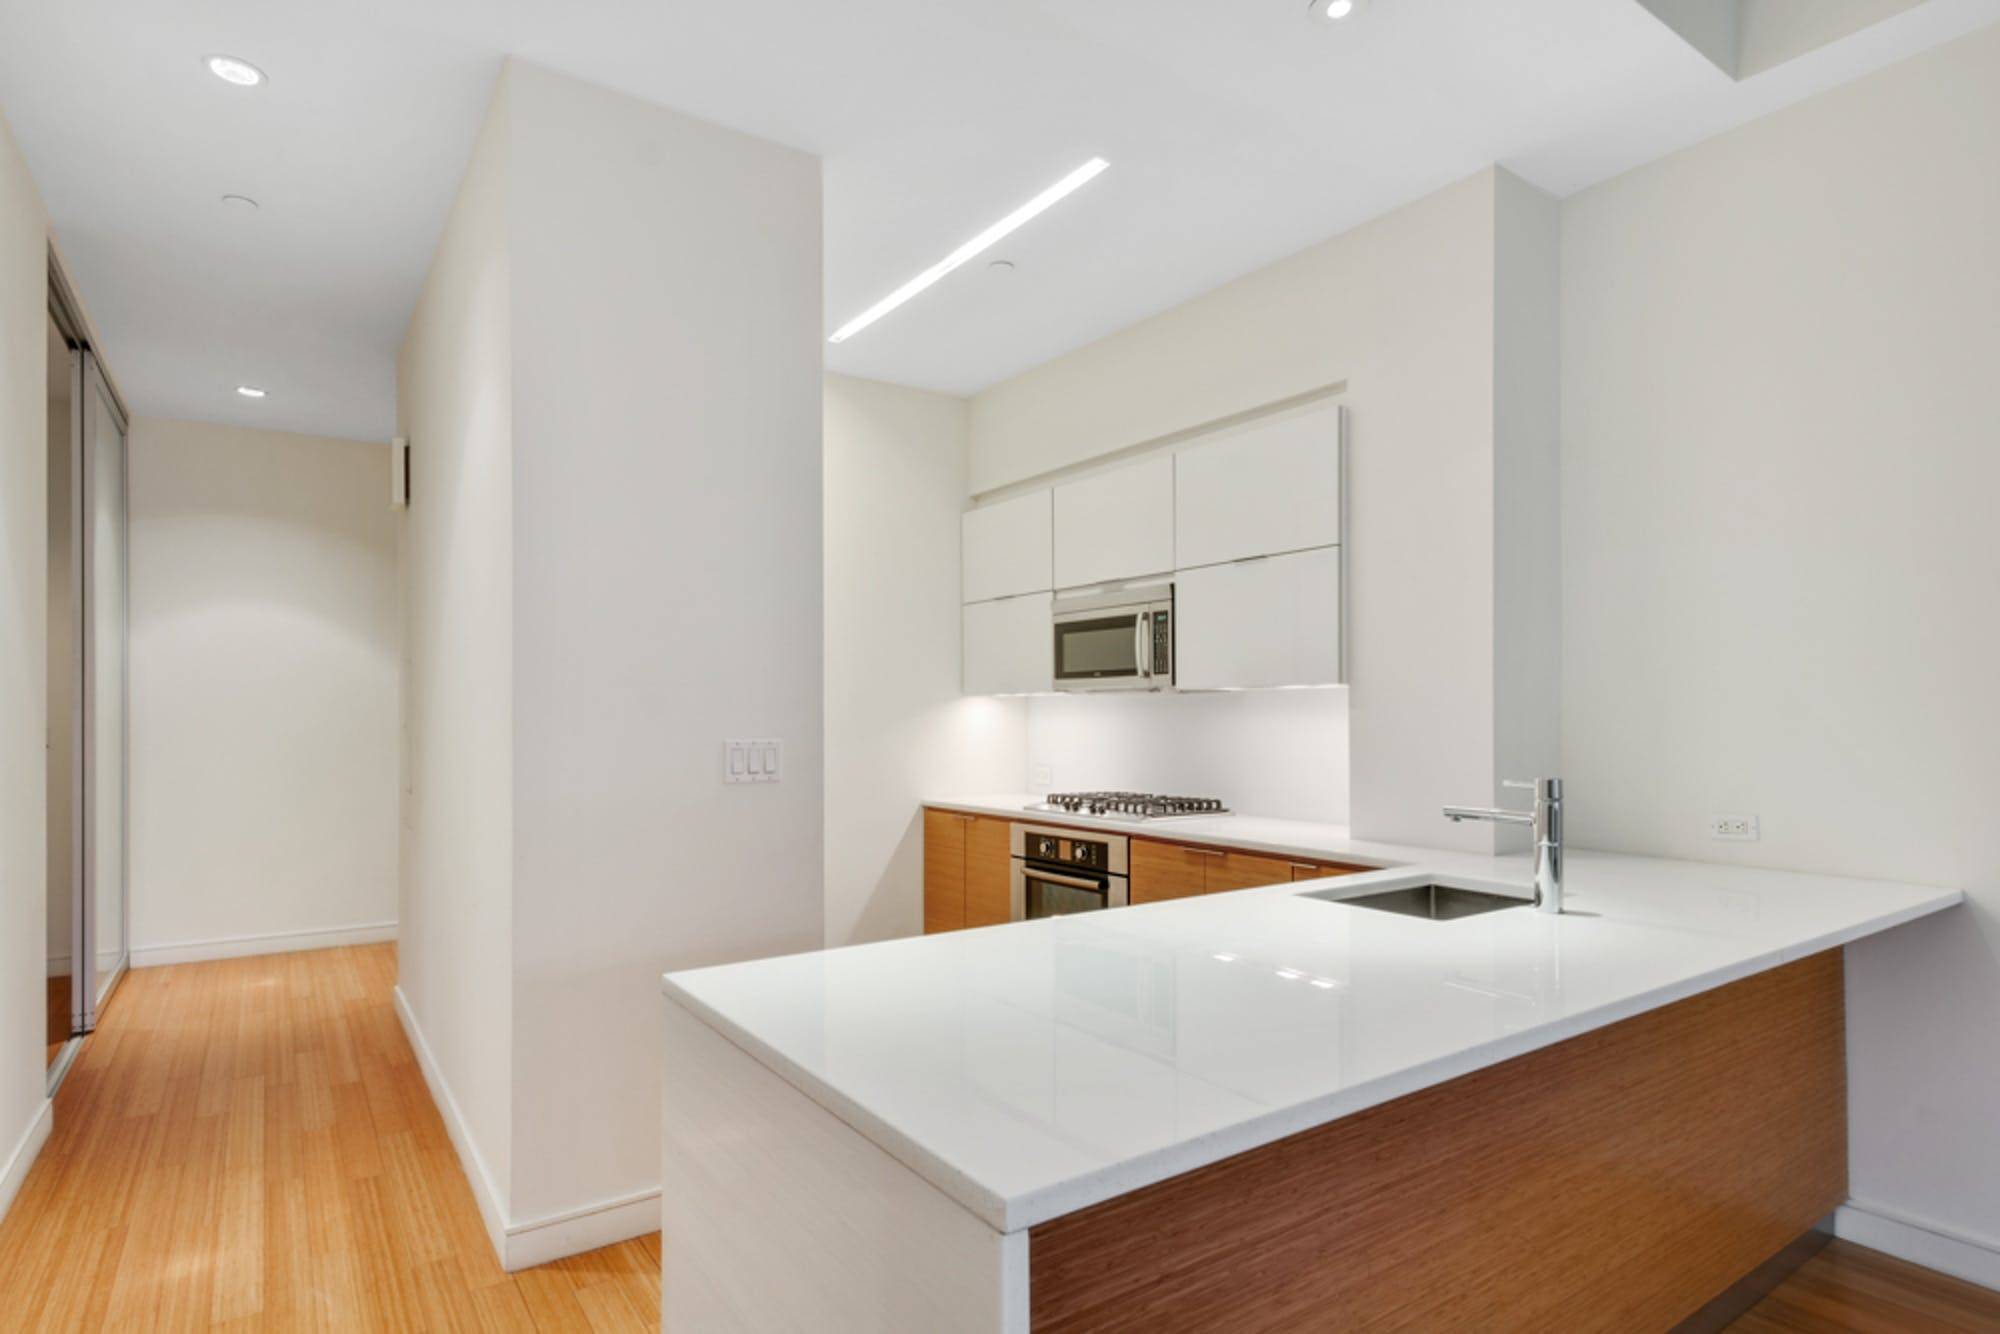 Welcome to unit 8C at 303 east 33rd street, a large 1048 square foot loft that seamlessly combines a contemporary design and environmentally conscious modern luxury.